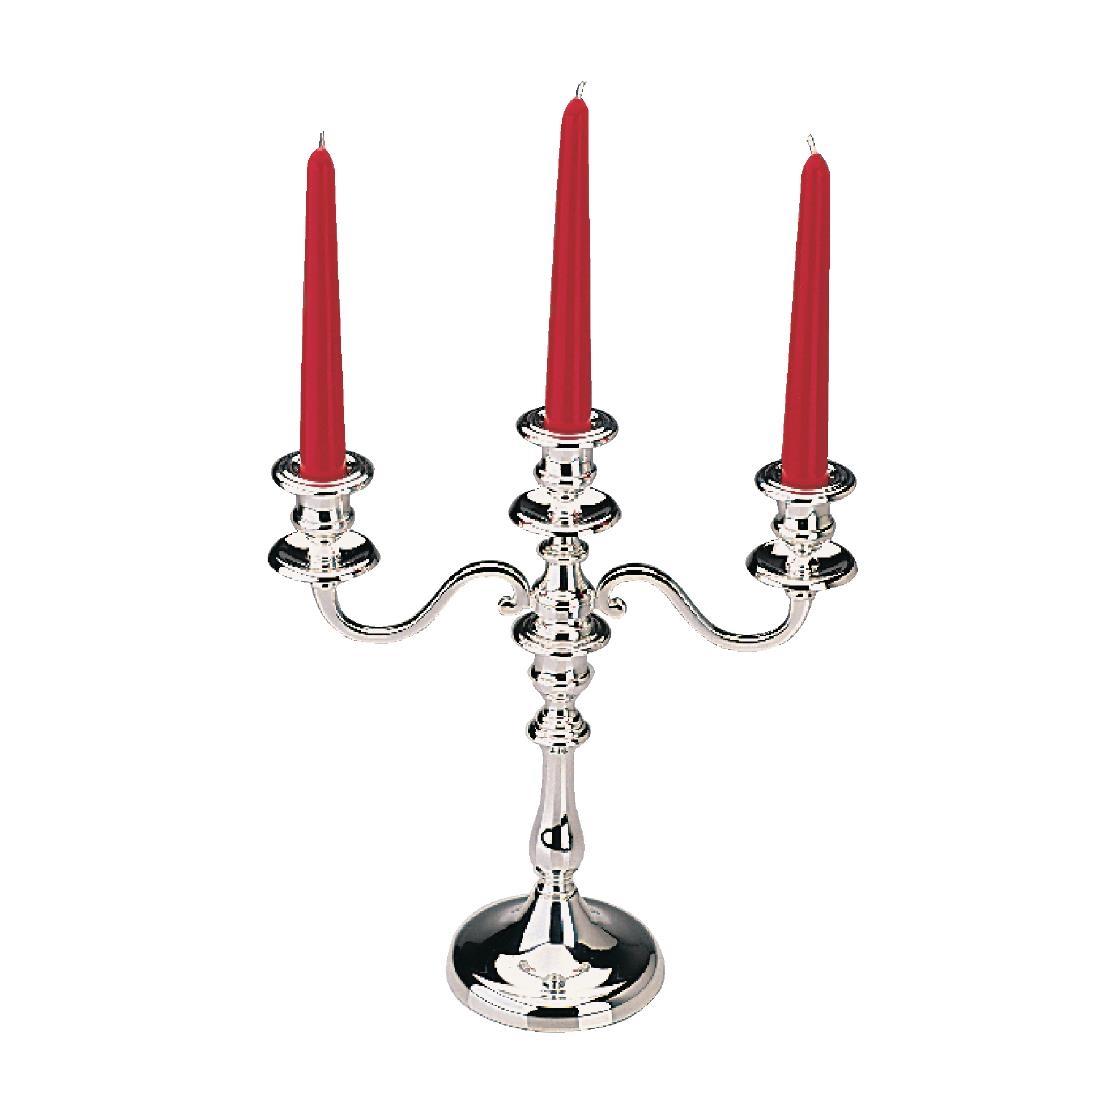 APS Silver Plated Candelabra - P908  - 1